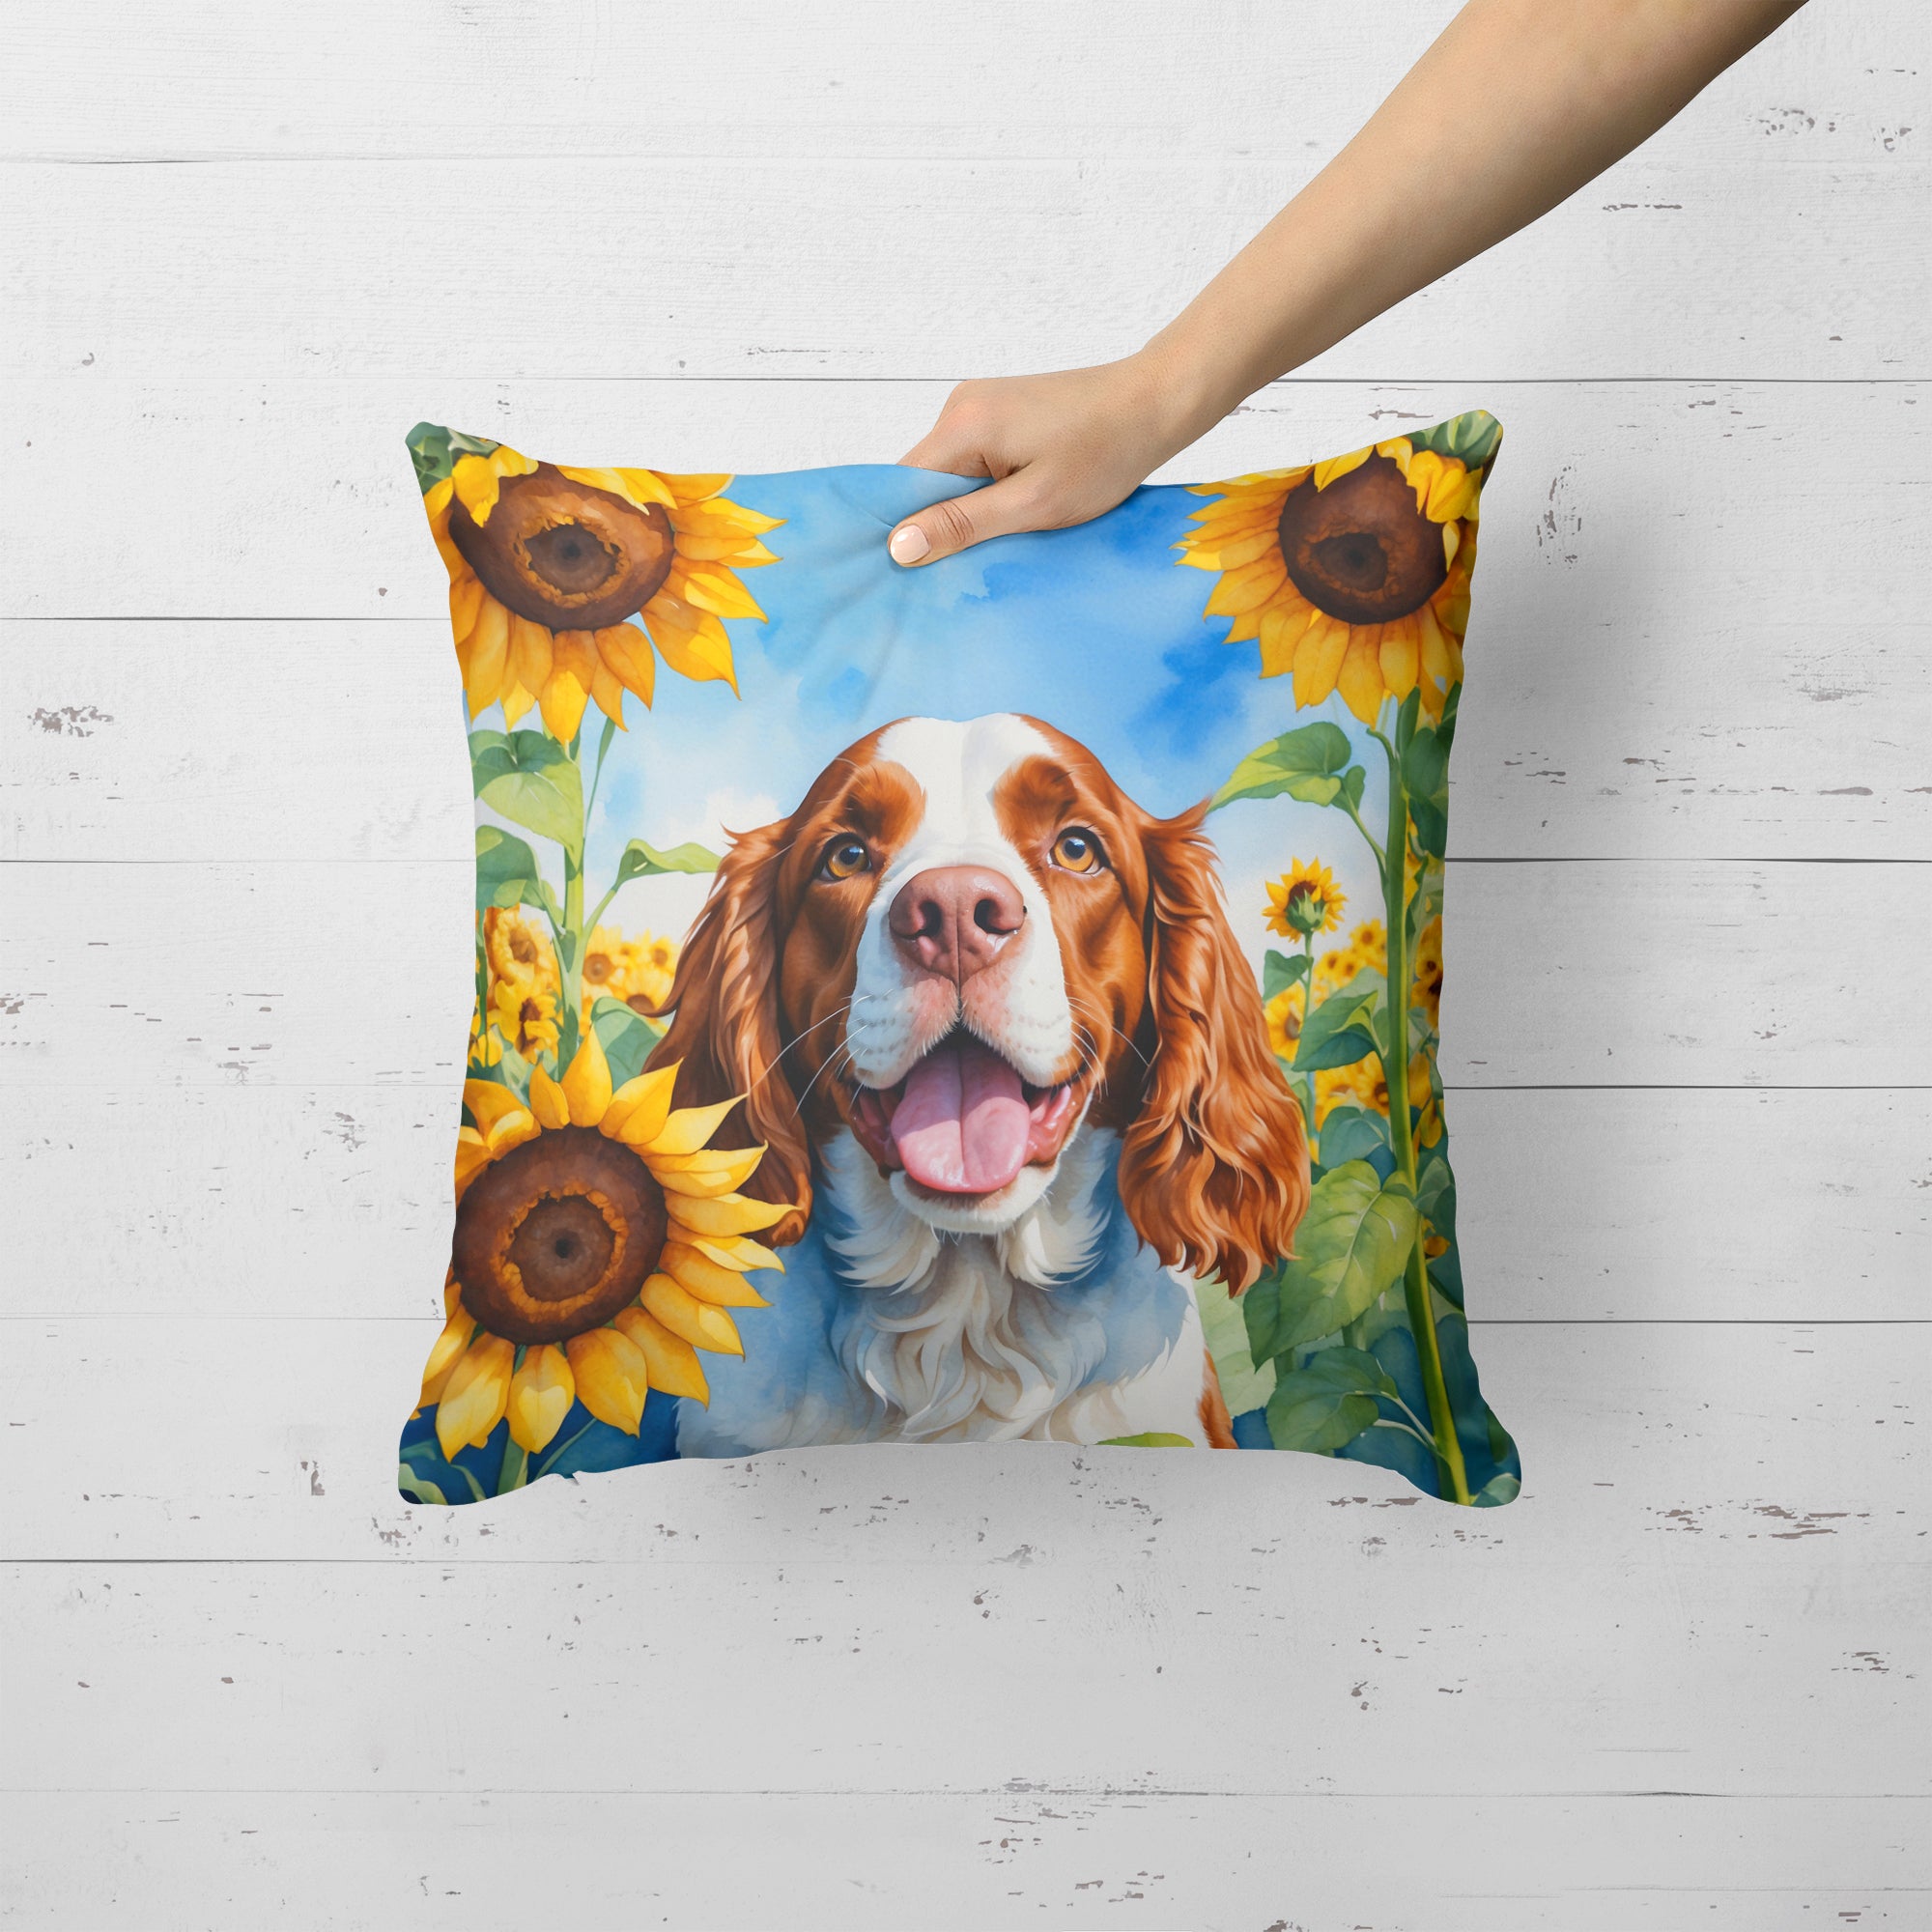 Buy this Welsh Springer Spaniel in Sunflowers Throw Pillow